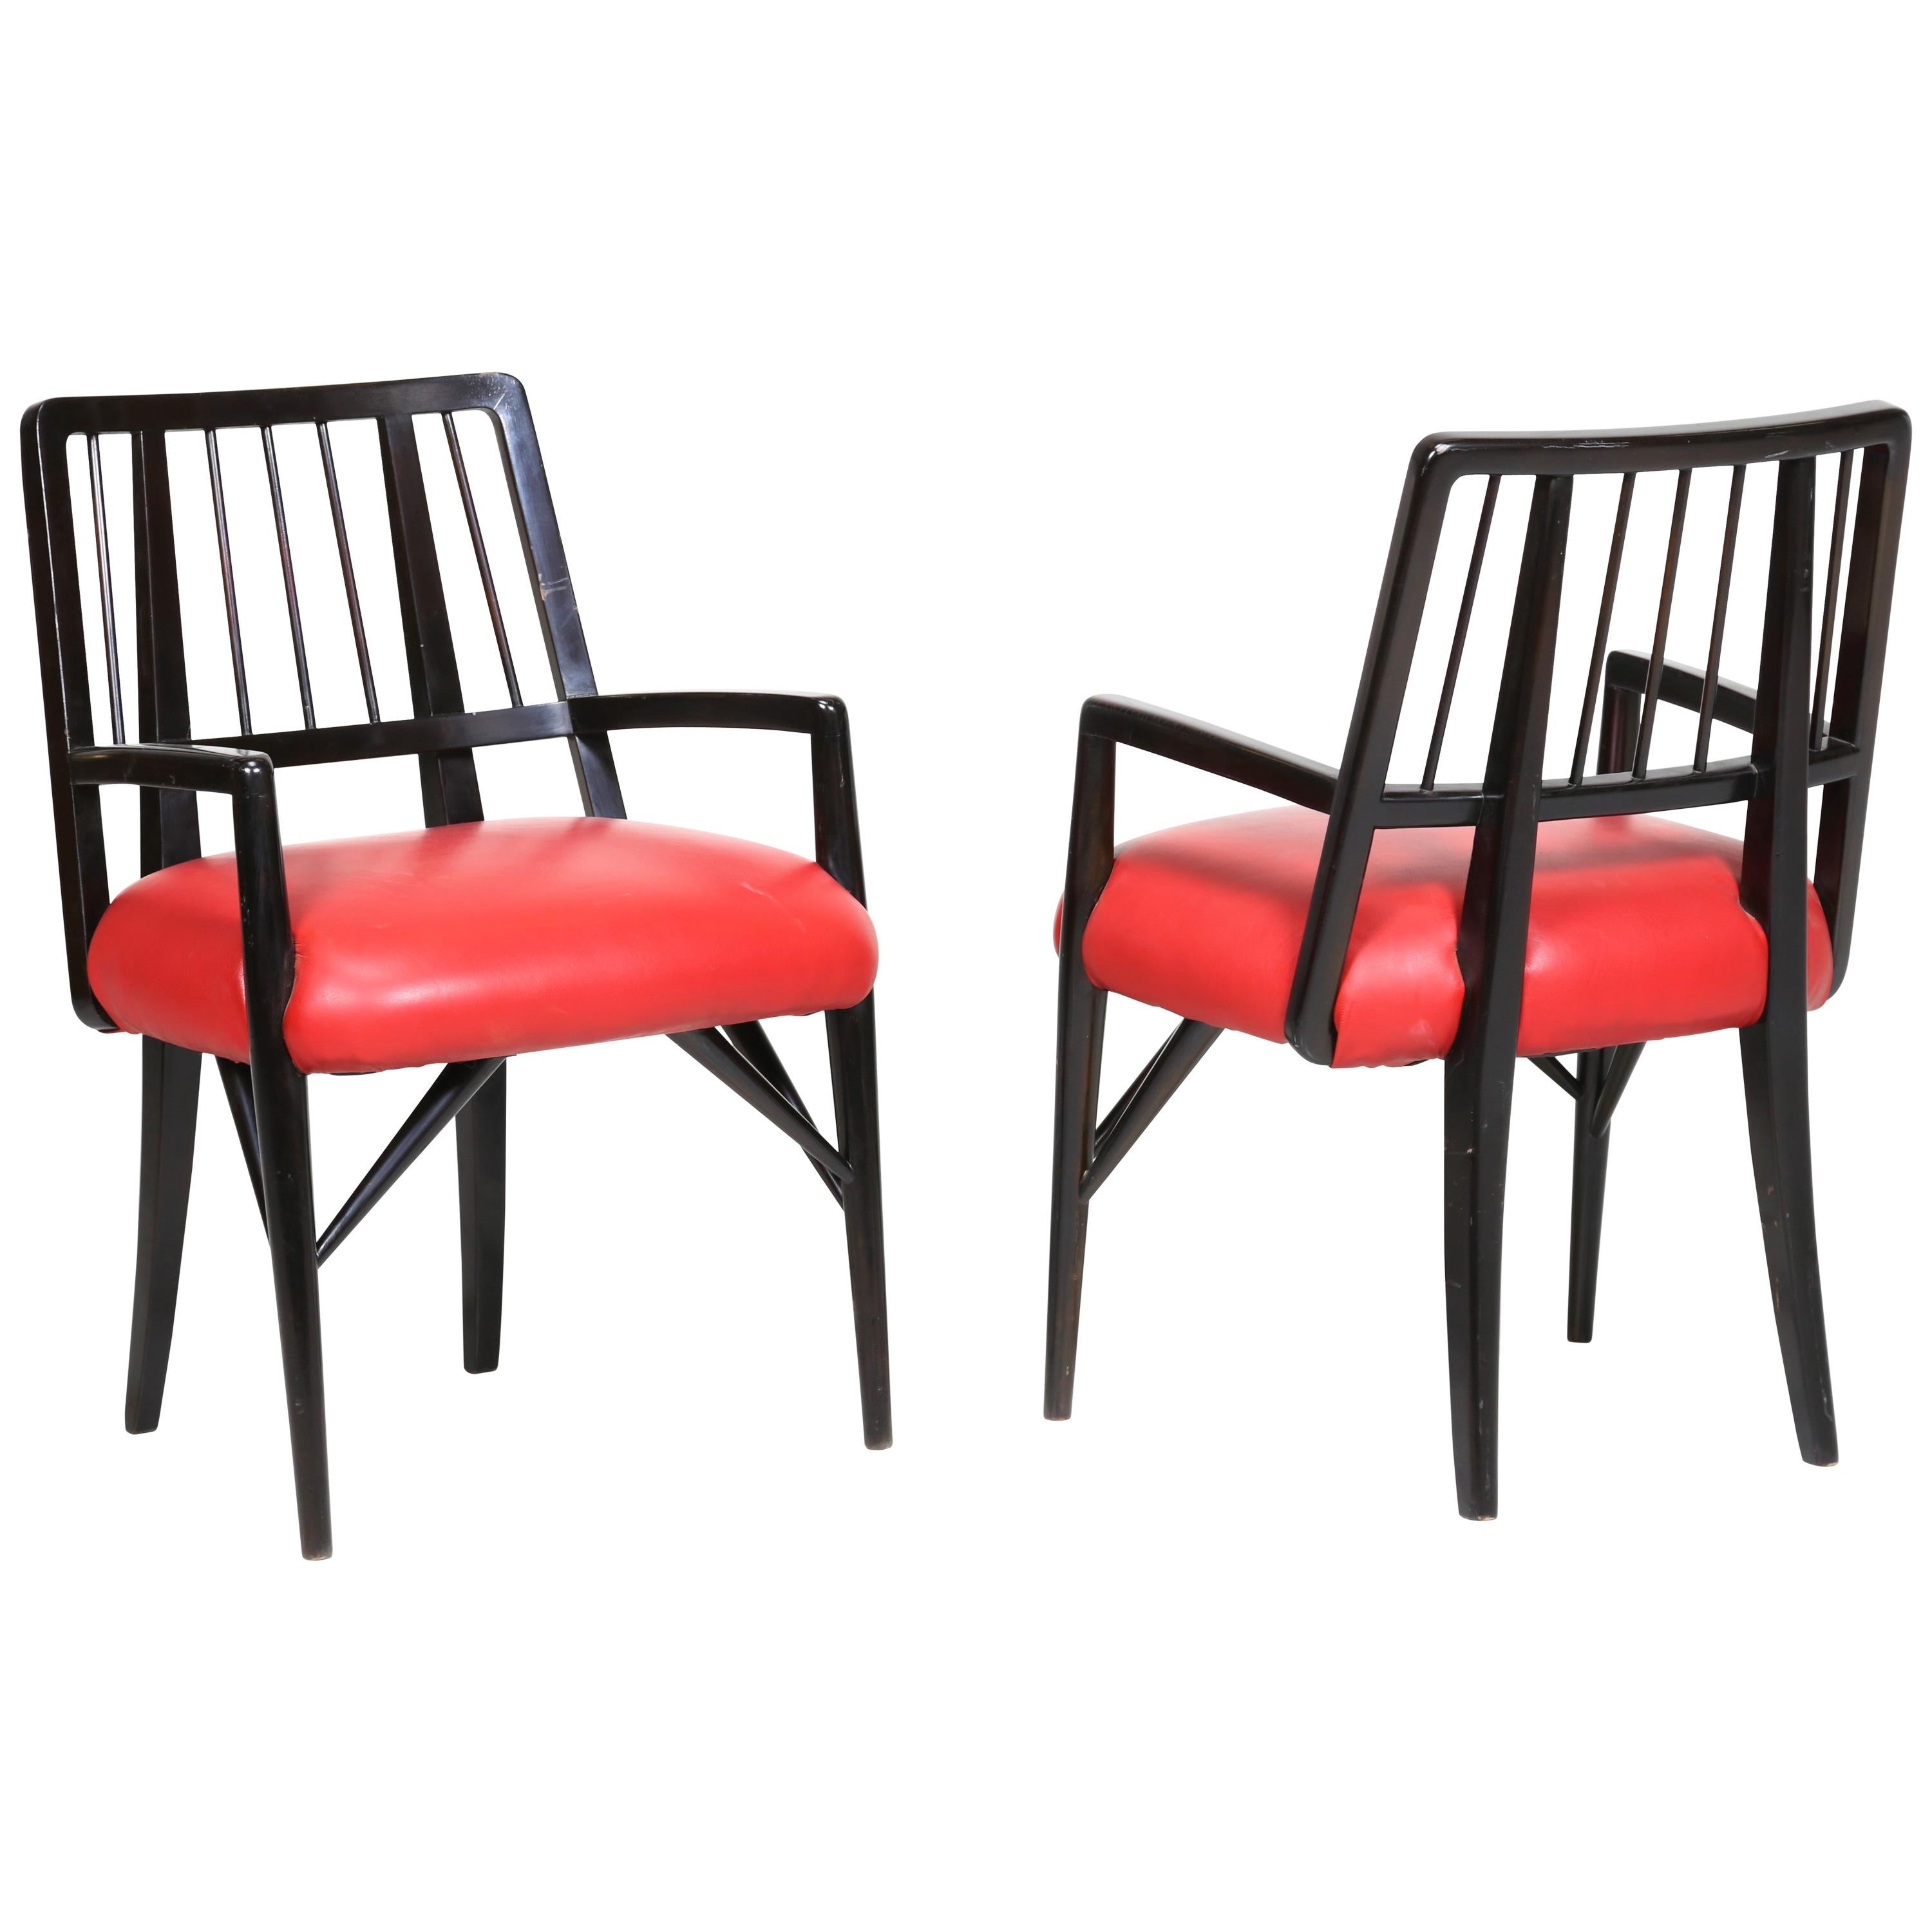 Paul Laszlo Set Chairs in Black Lacquered Wood, 1950s